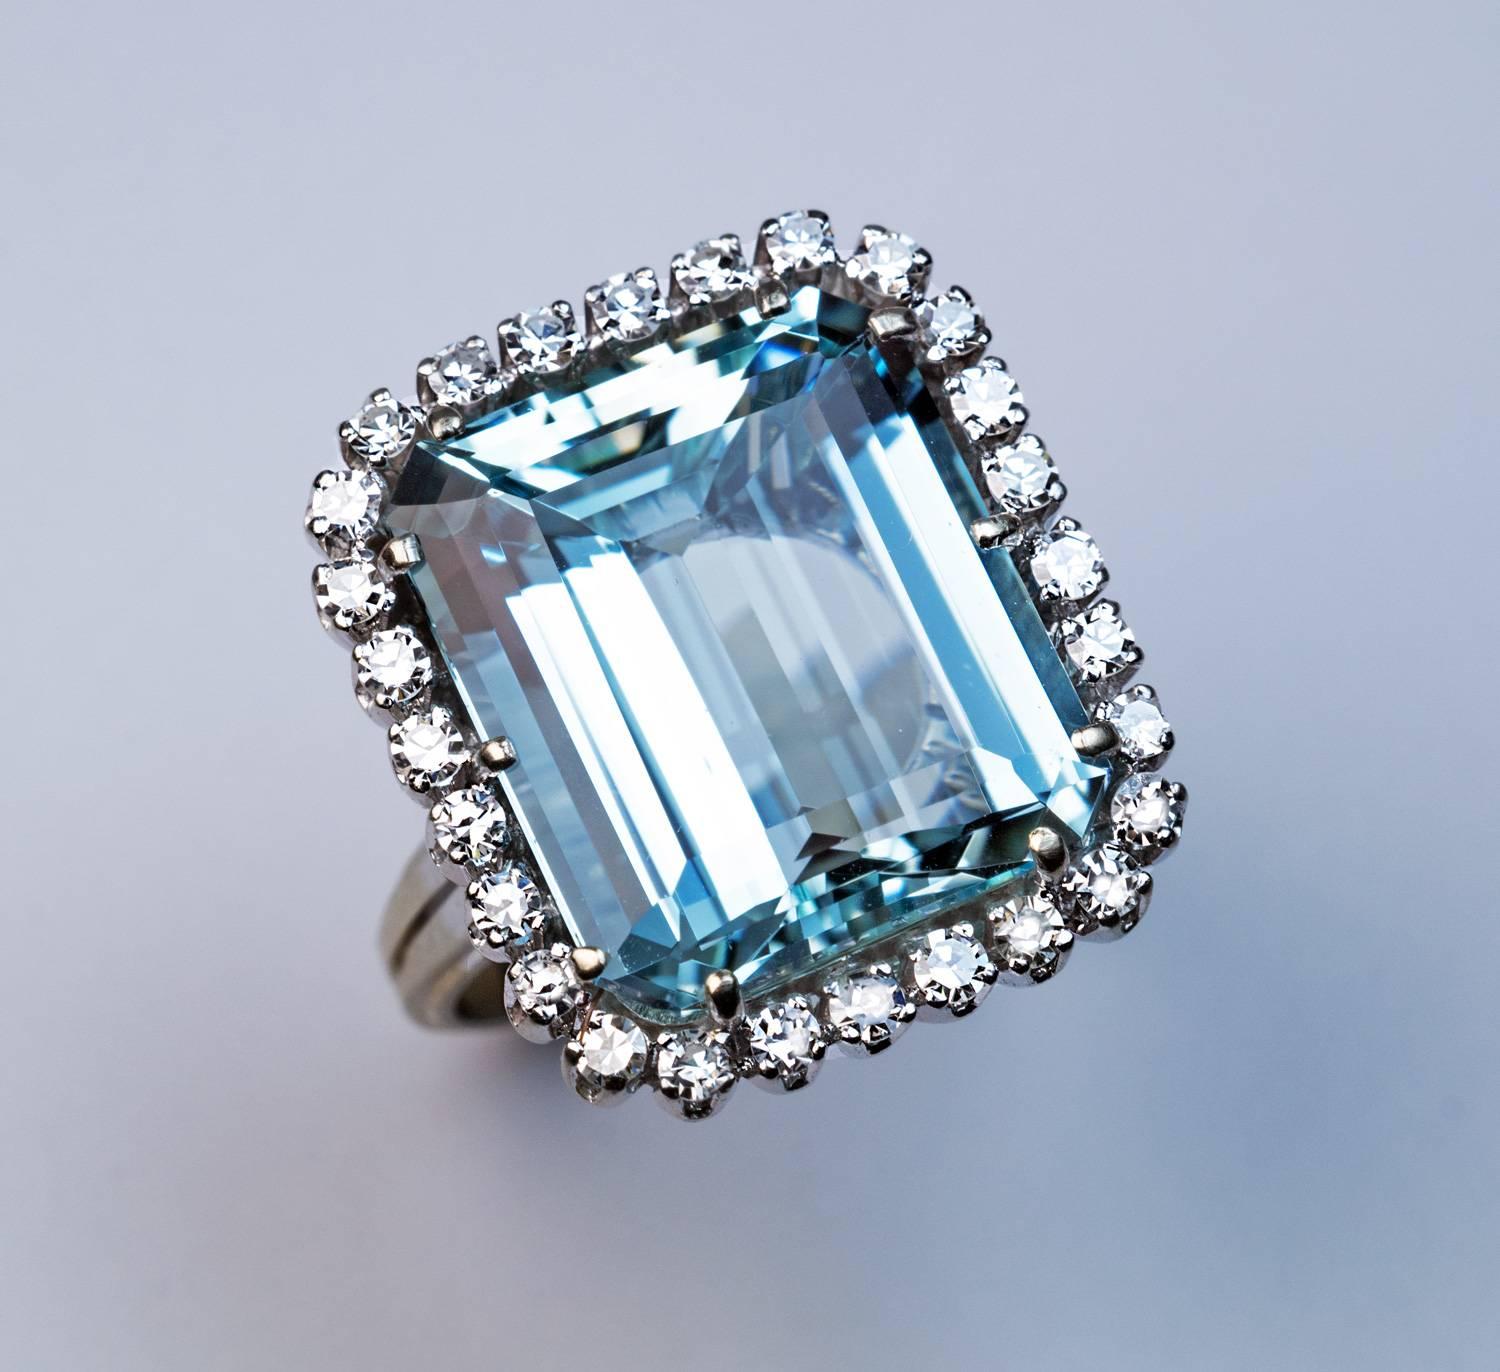 Circa 1950s

A mid-century 18K white gold cluster ring features a superb cool blue step-cut aquamarine (16.1 x 13.9 x 7.5 mm) surrounded by 28 bright white single-cut diamonds.

Aquamarine 12.55 ct.

Estimated total diamond weight 0.60